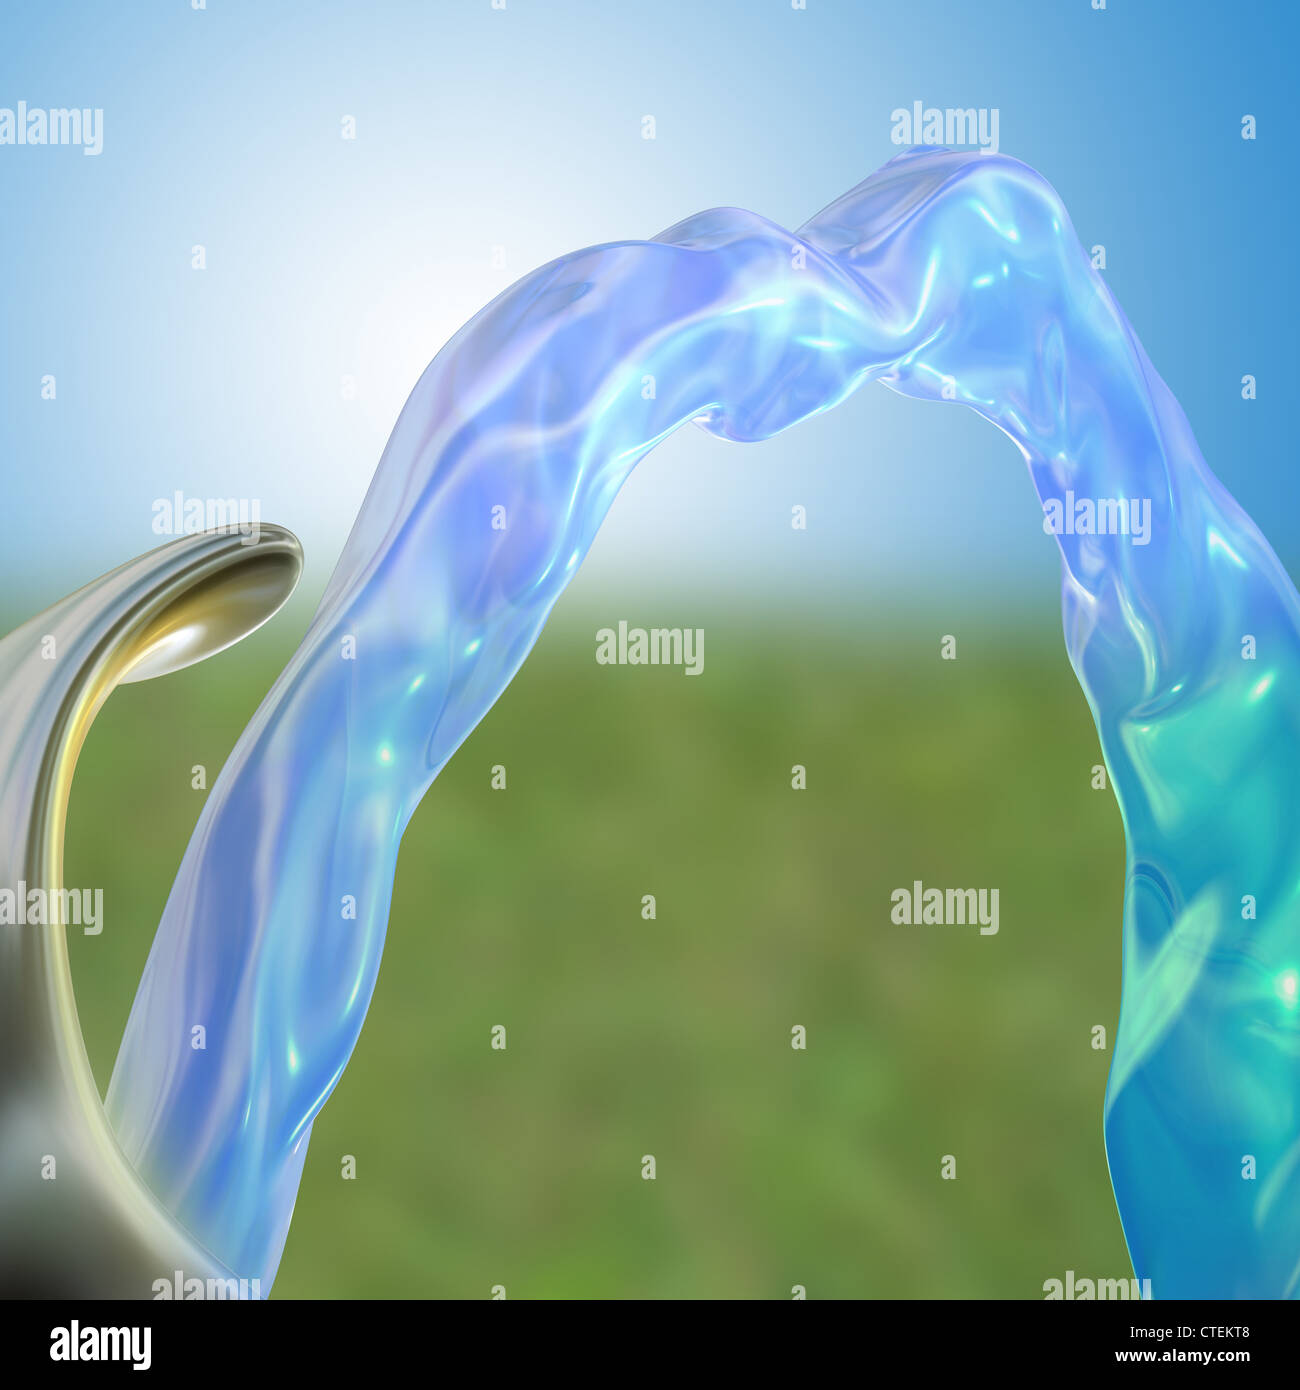 Illustration of a drinking water fountain on a sunny day Stock Photo